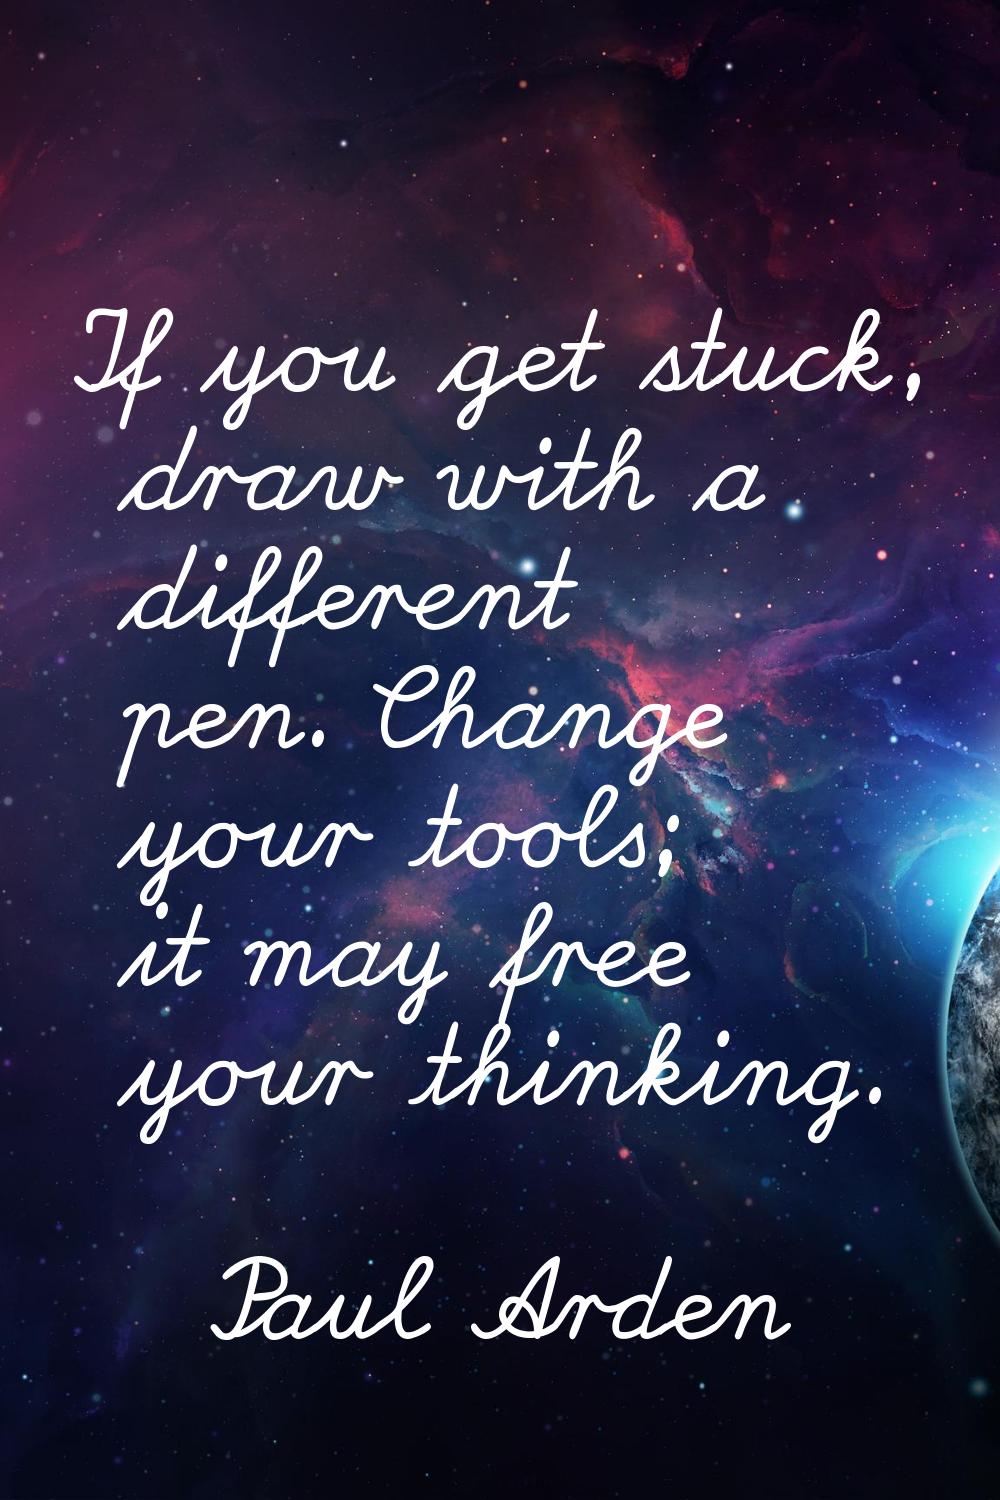 If you get stuck, draw with a different pen. Change your tools; it may free your thinking.